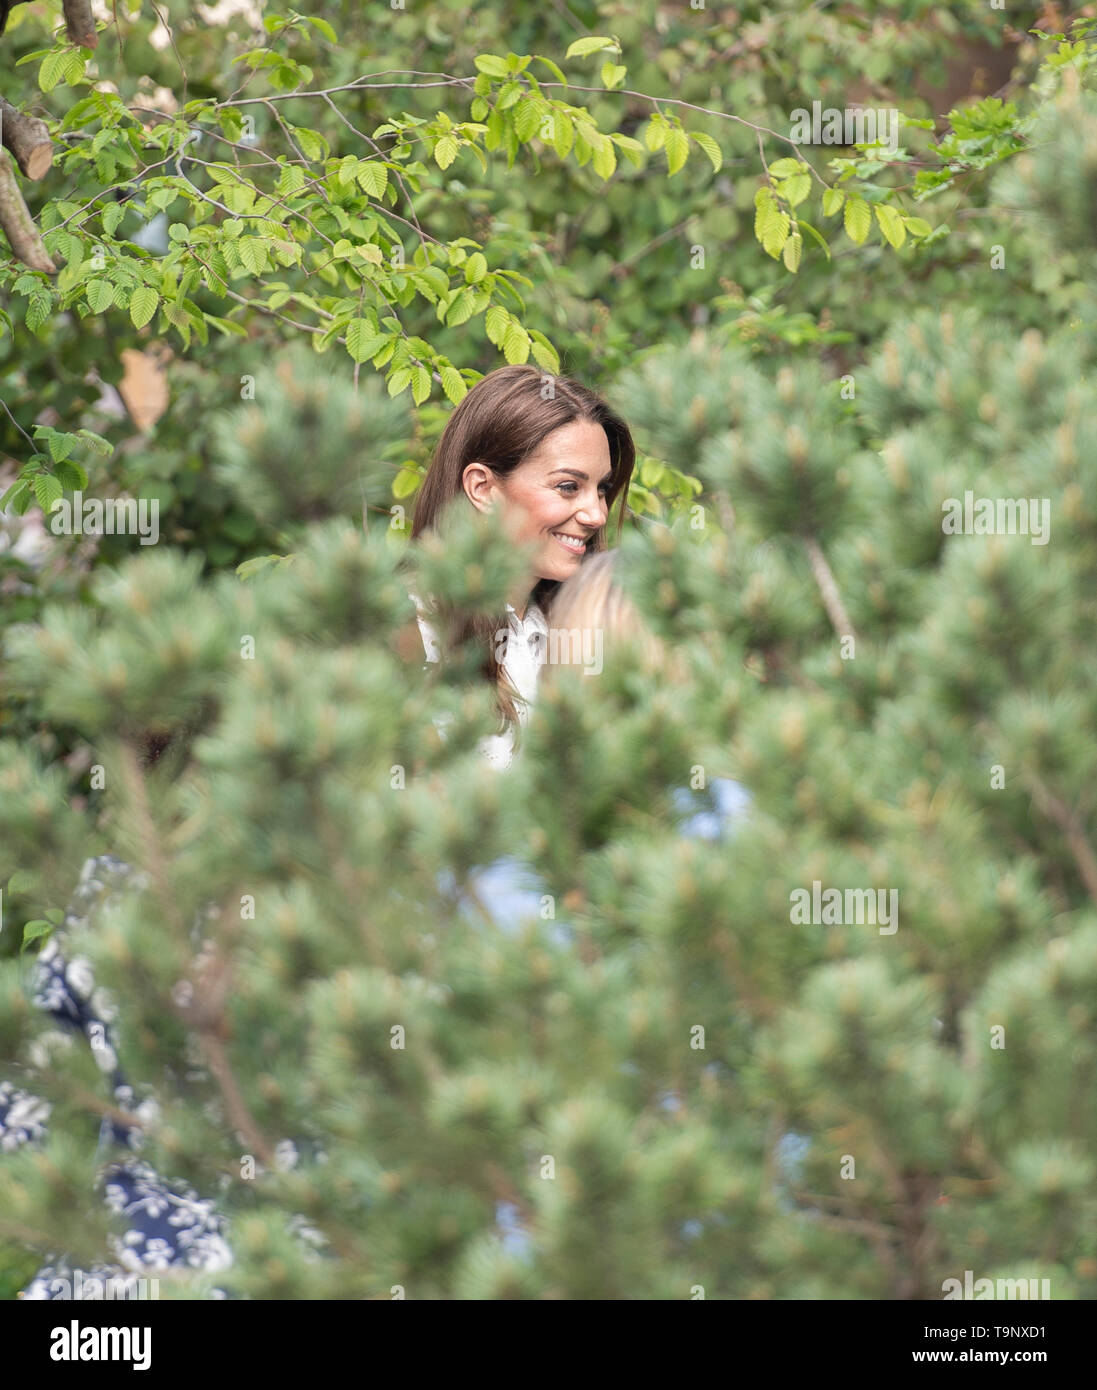 Royal Hospital Chelsea, London, UK. 20th May 2019. HRH The Duchess of Cambridge views her garden, designed with Andree Davies and Adam White at The RHS Back to Nature Garden at the Chelsea Flower Show 2019. Credit: Malcolm Park/Alamy Live News. Stock Photo